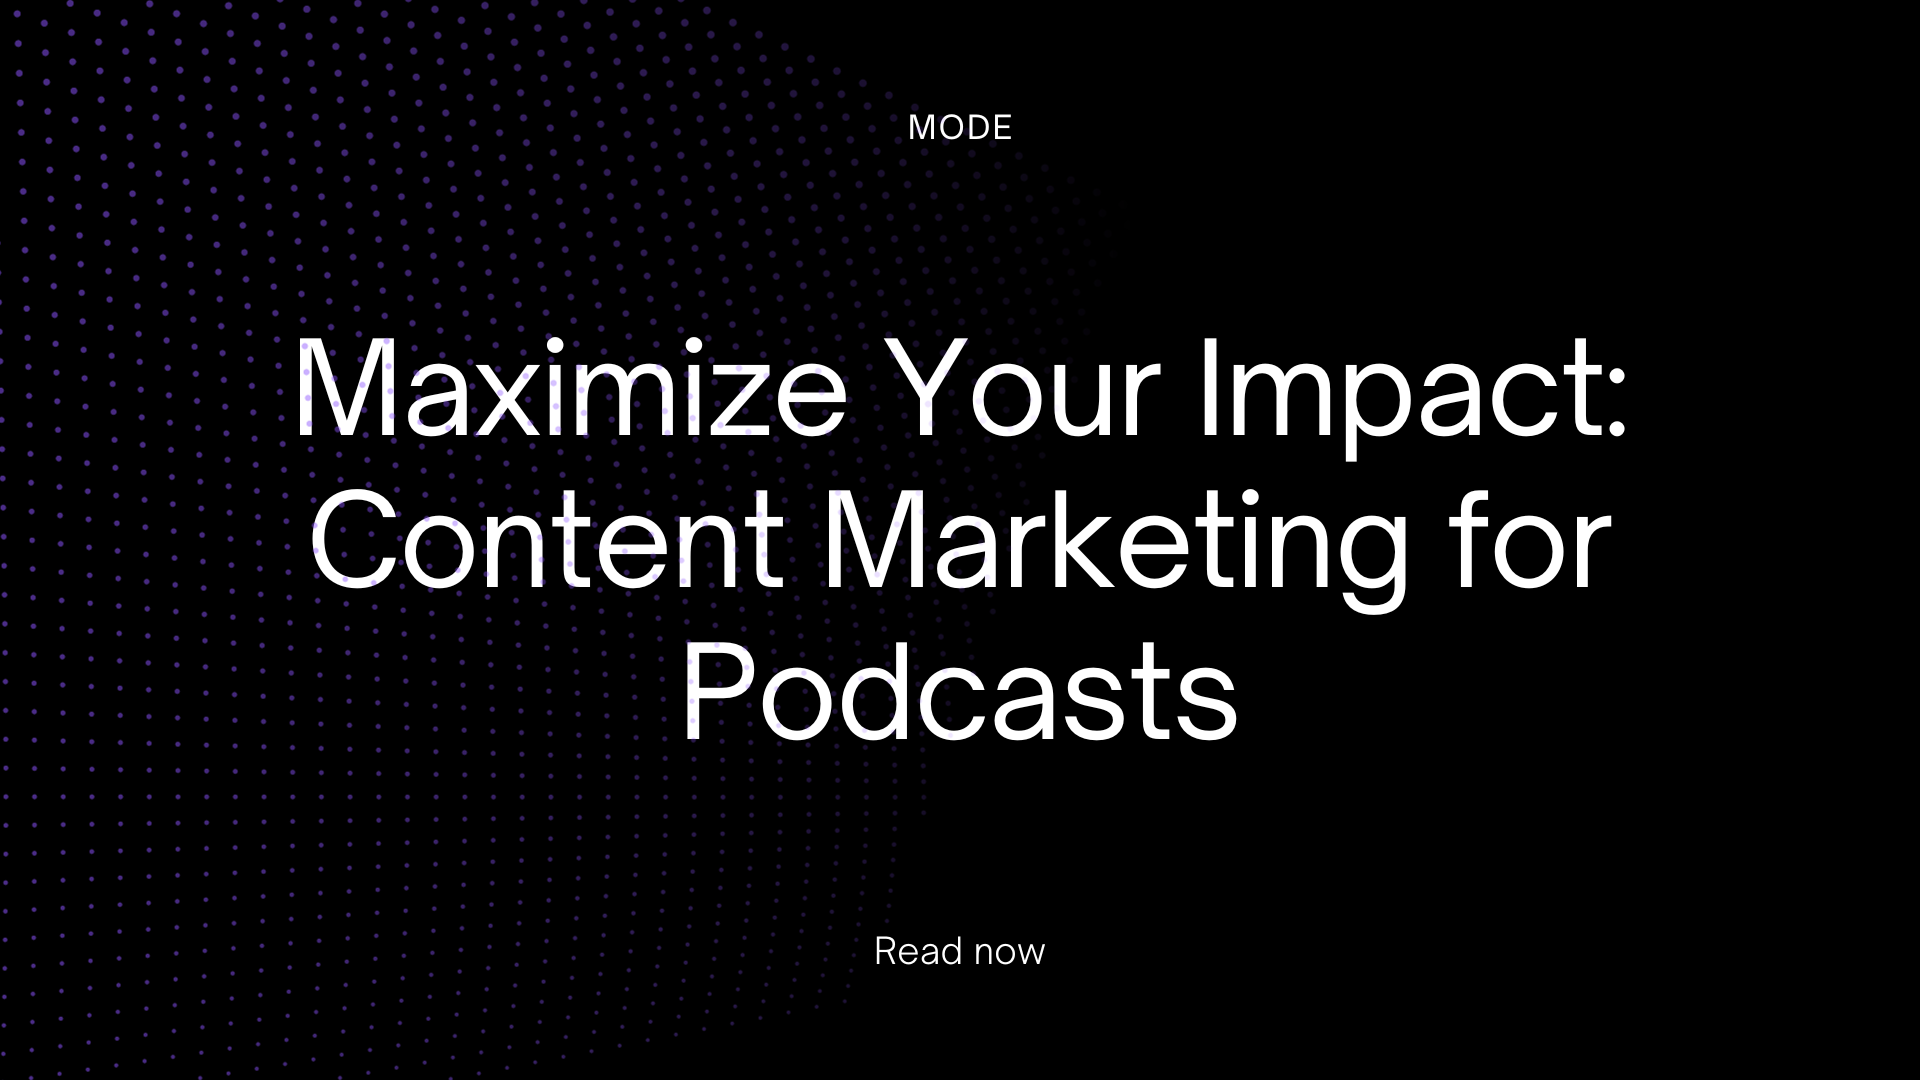 Maximize Your Impact: Content Marketing for Podcasts